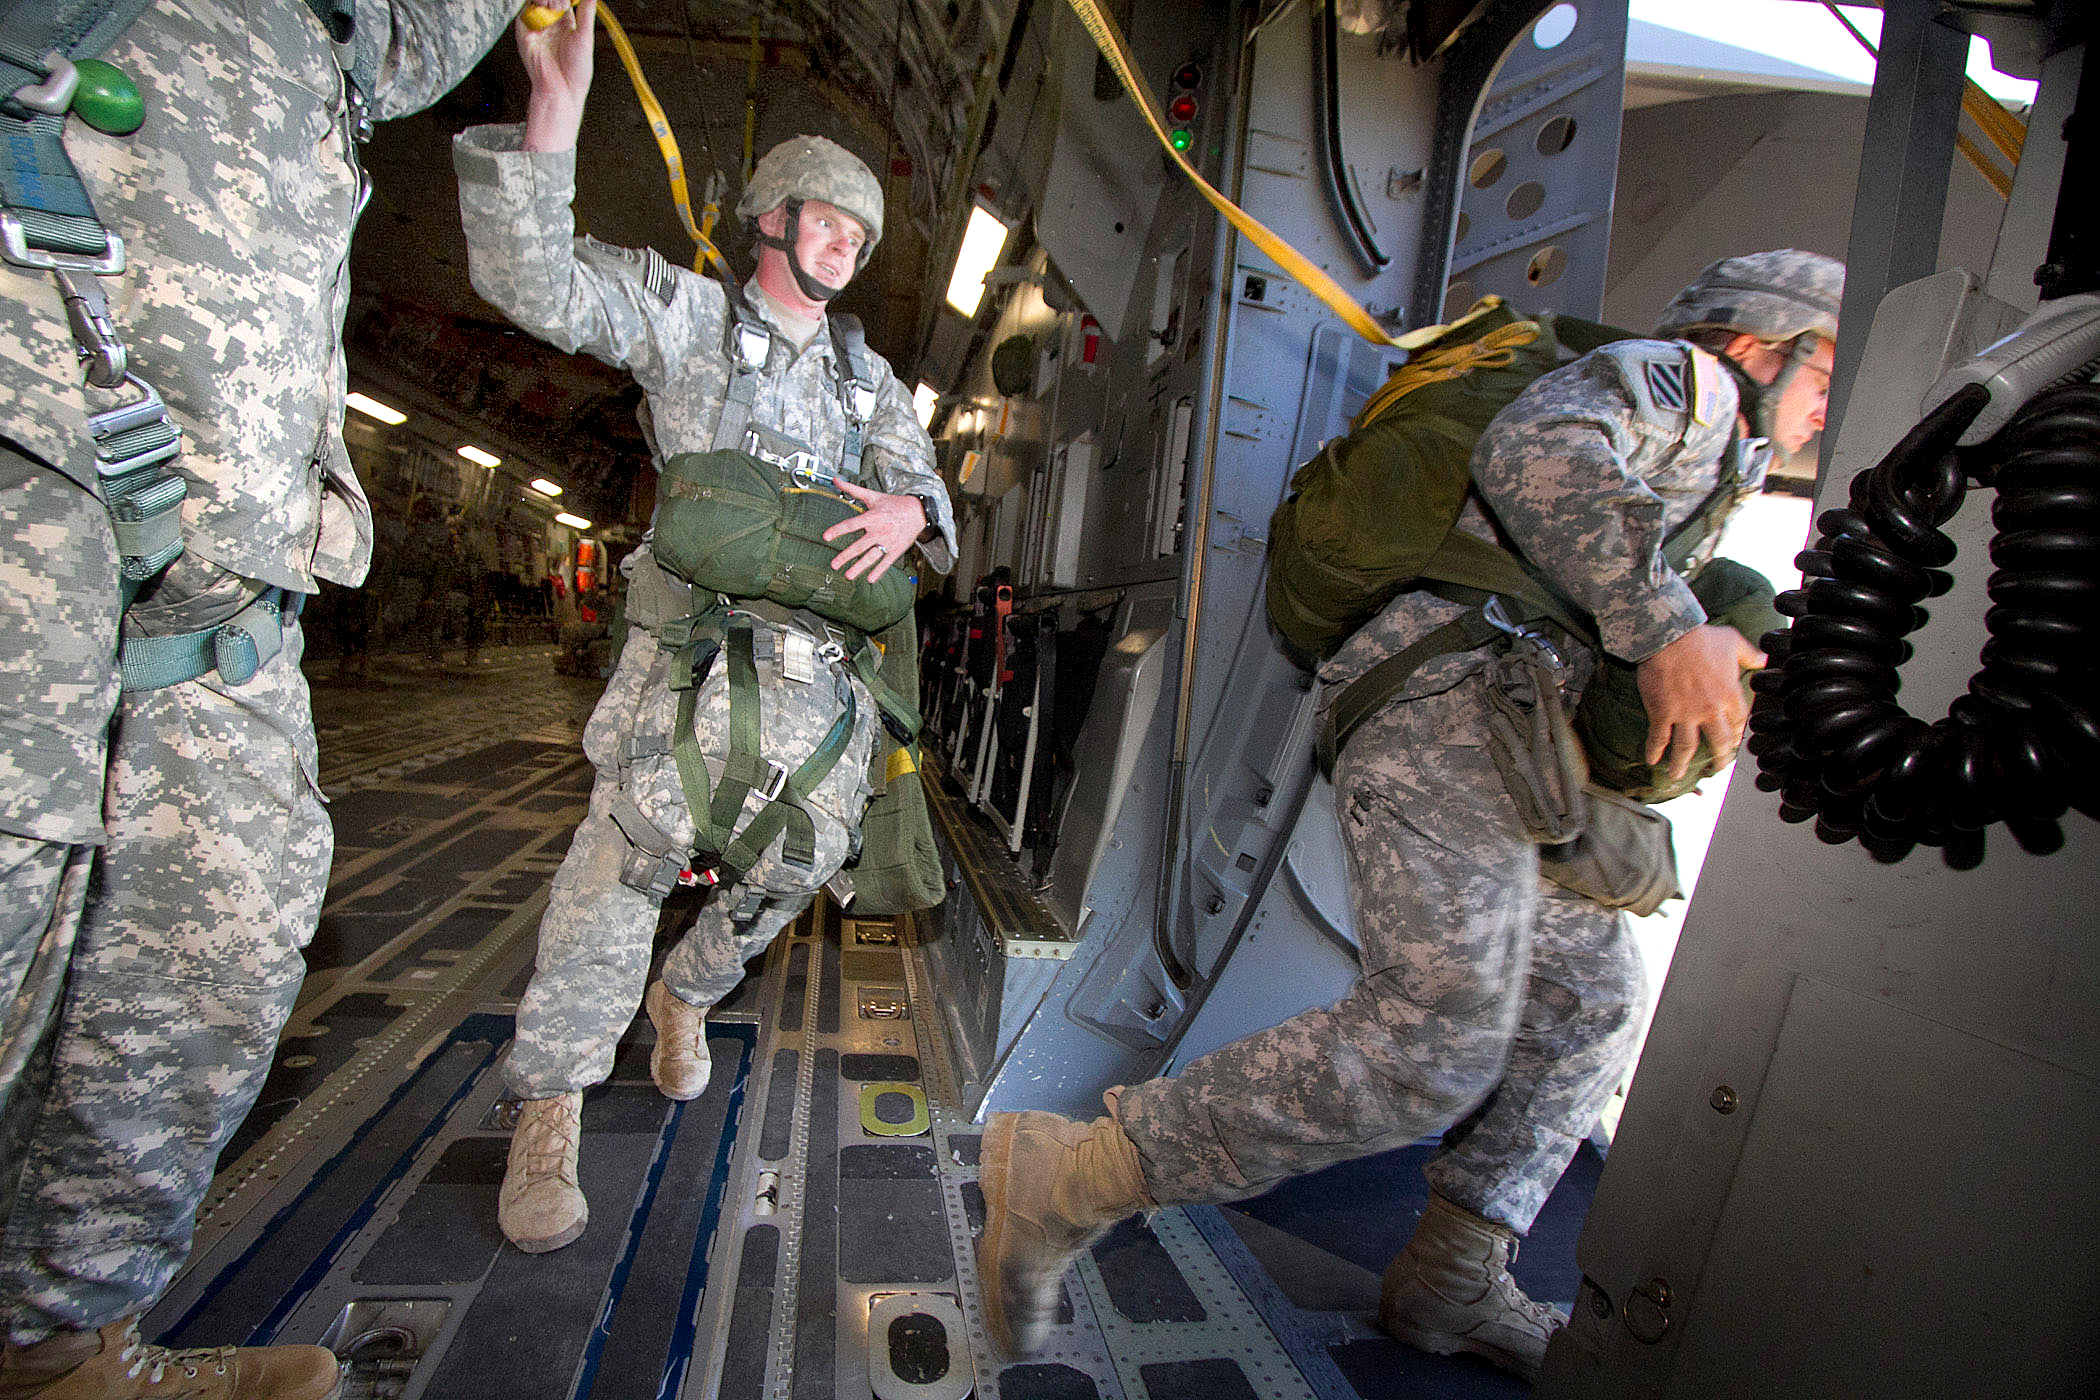 Army paratroopers jump from a C-17 Globemaster III aircraft during an  airborne training exercise on